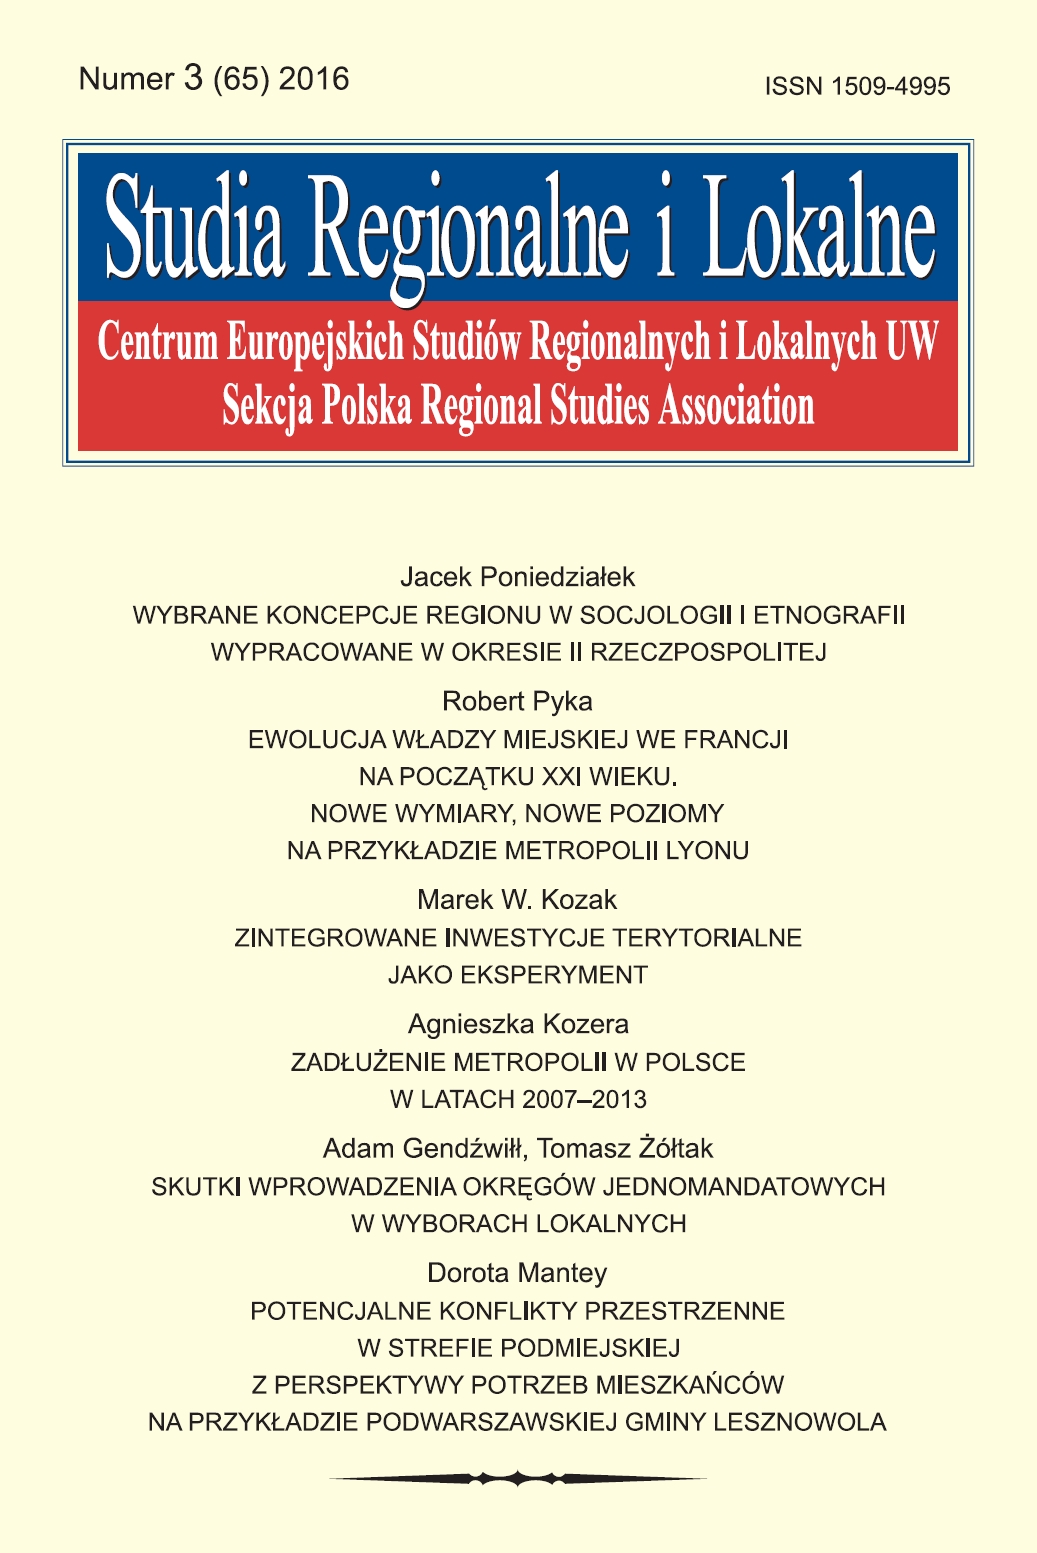 Selected concepts ofregion in sociology and ethnography developed in the Second Republic of Poland Cover Image